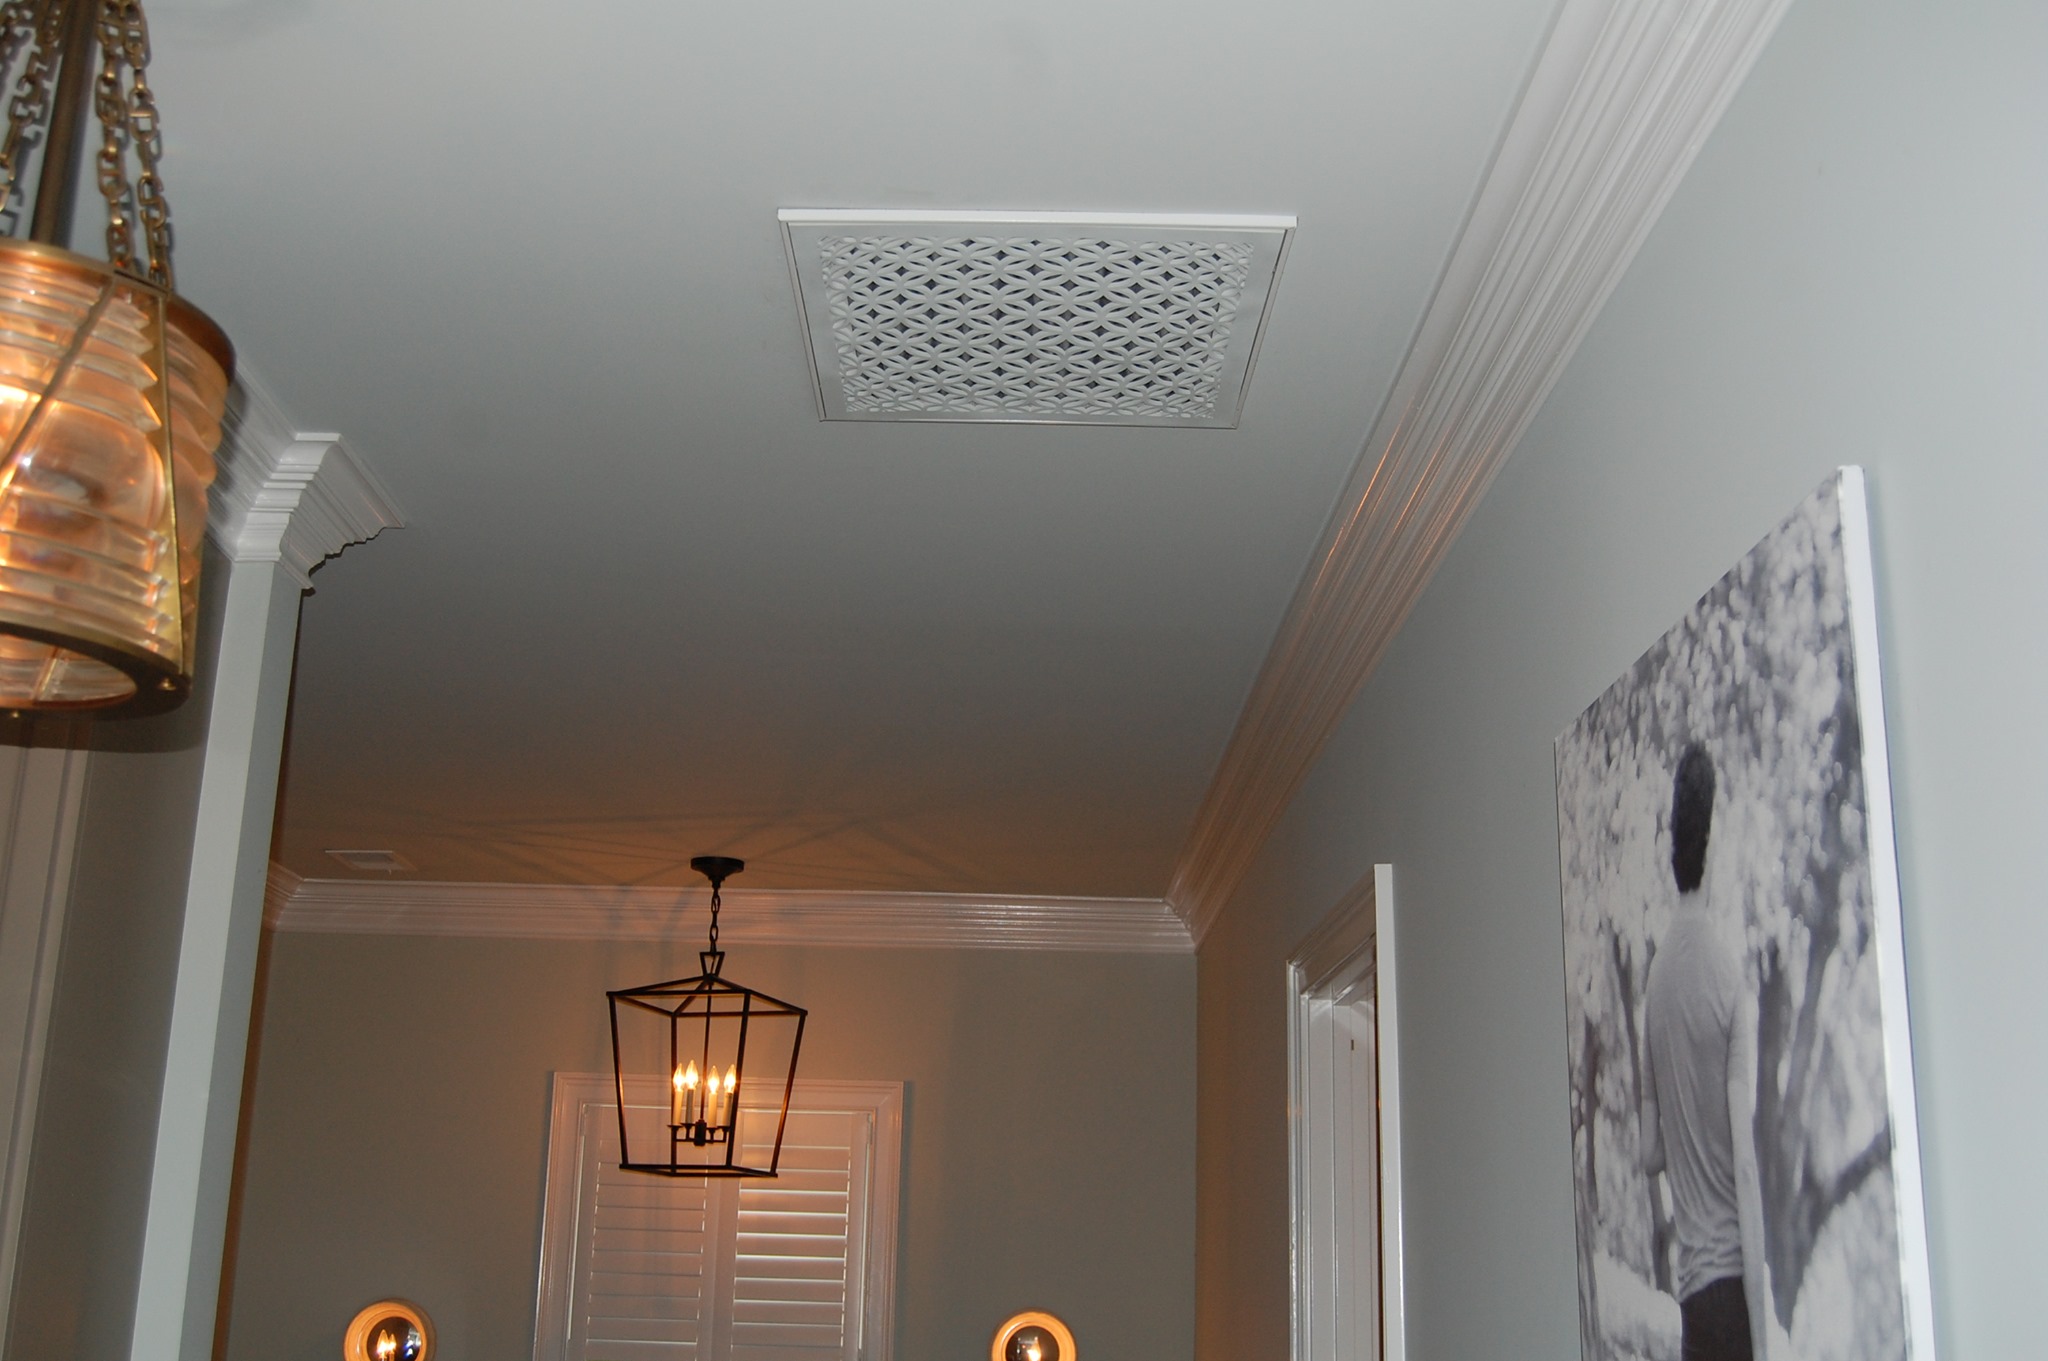 Vent Covers Magnetic for Ceiling